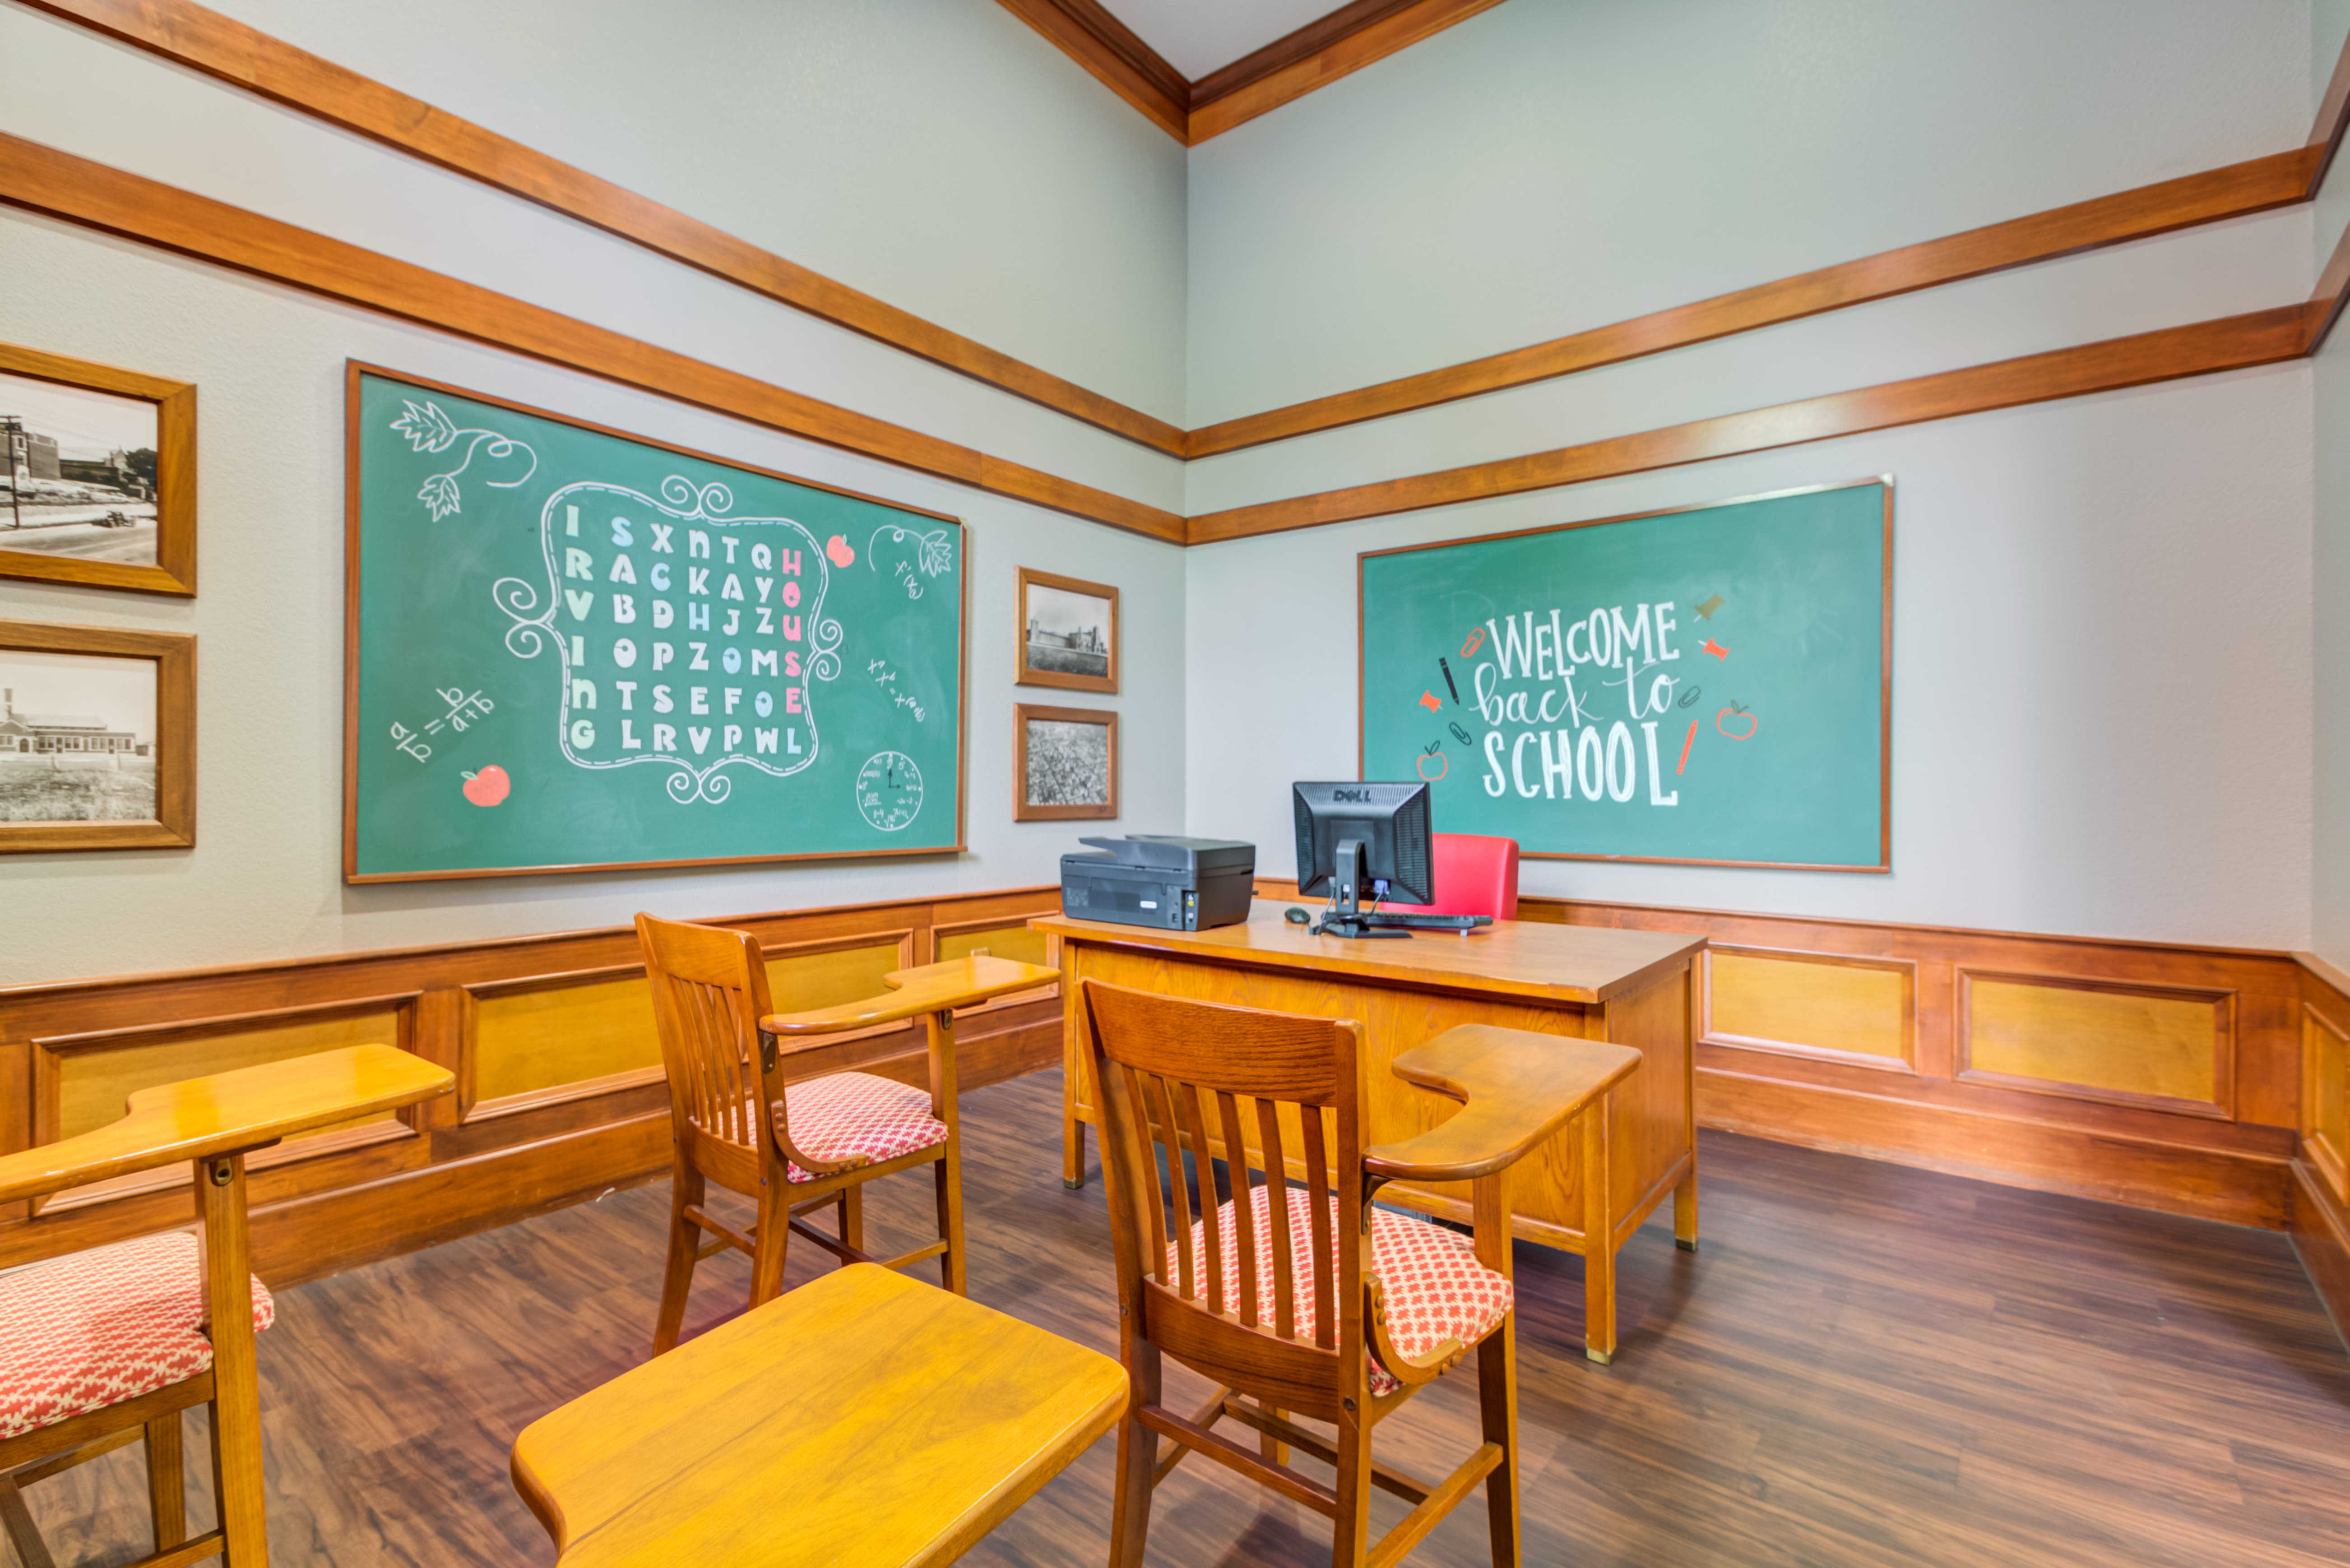 Former classroom turned into a community gathering space at Irving Schoolhouse Apartments in Salt Lake City, Utah